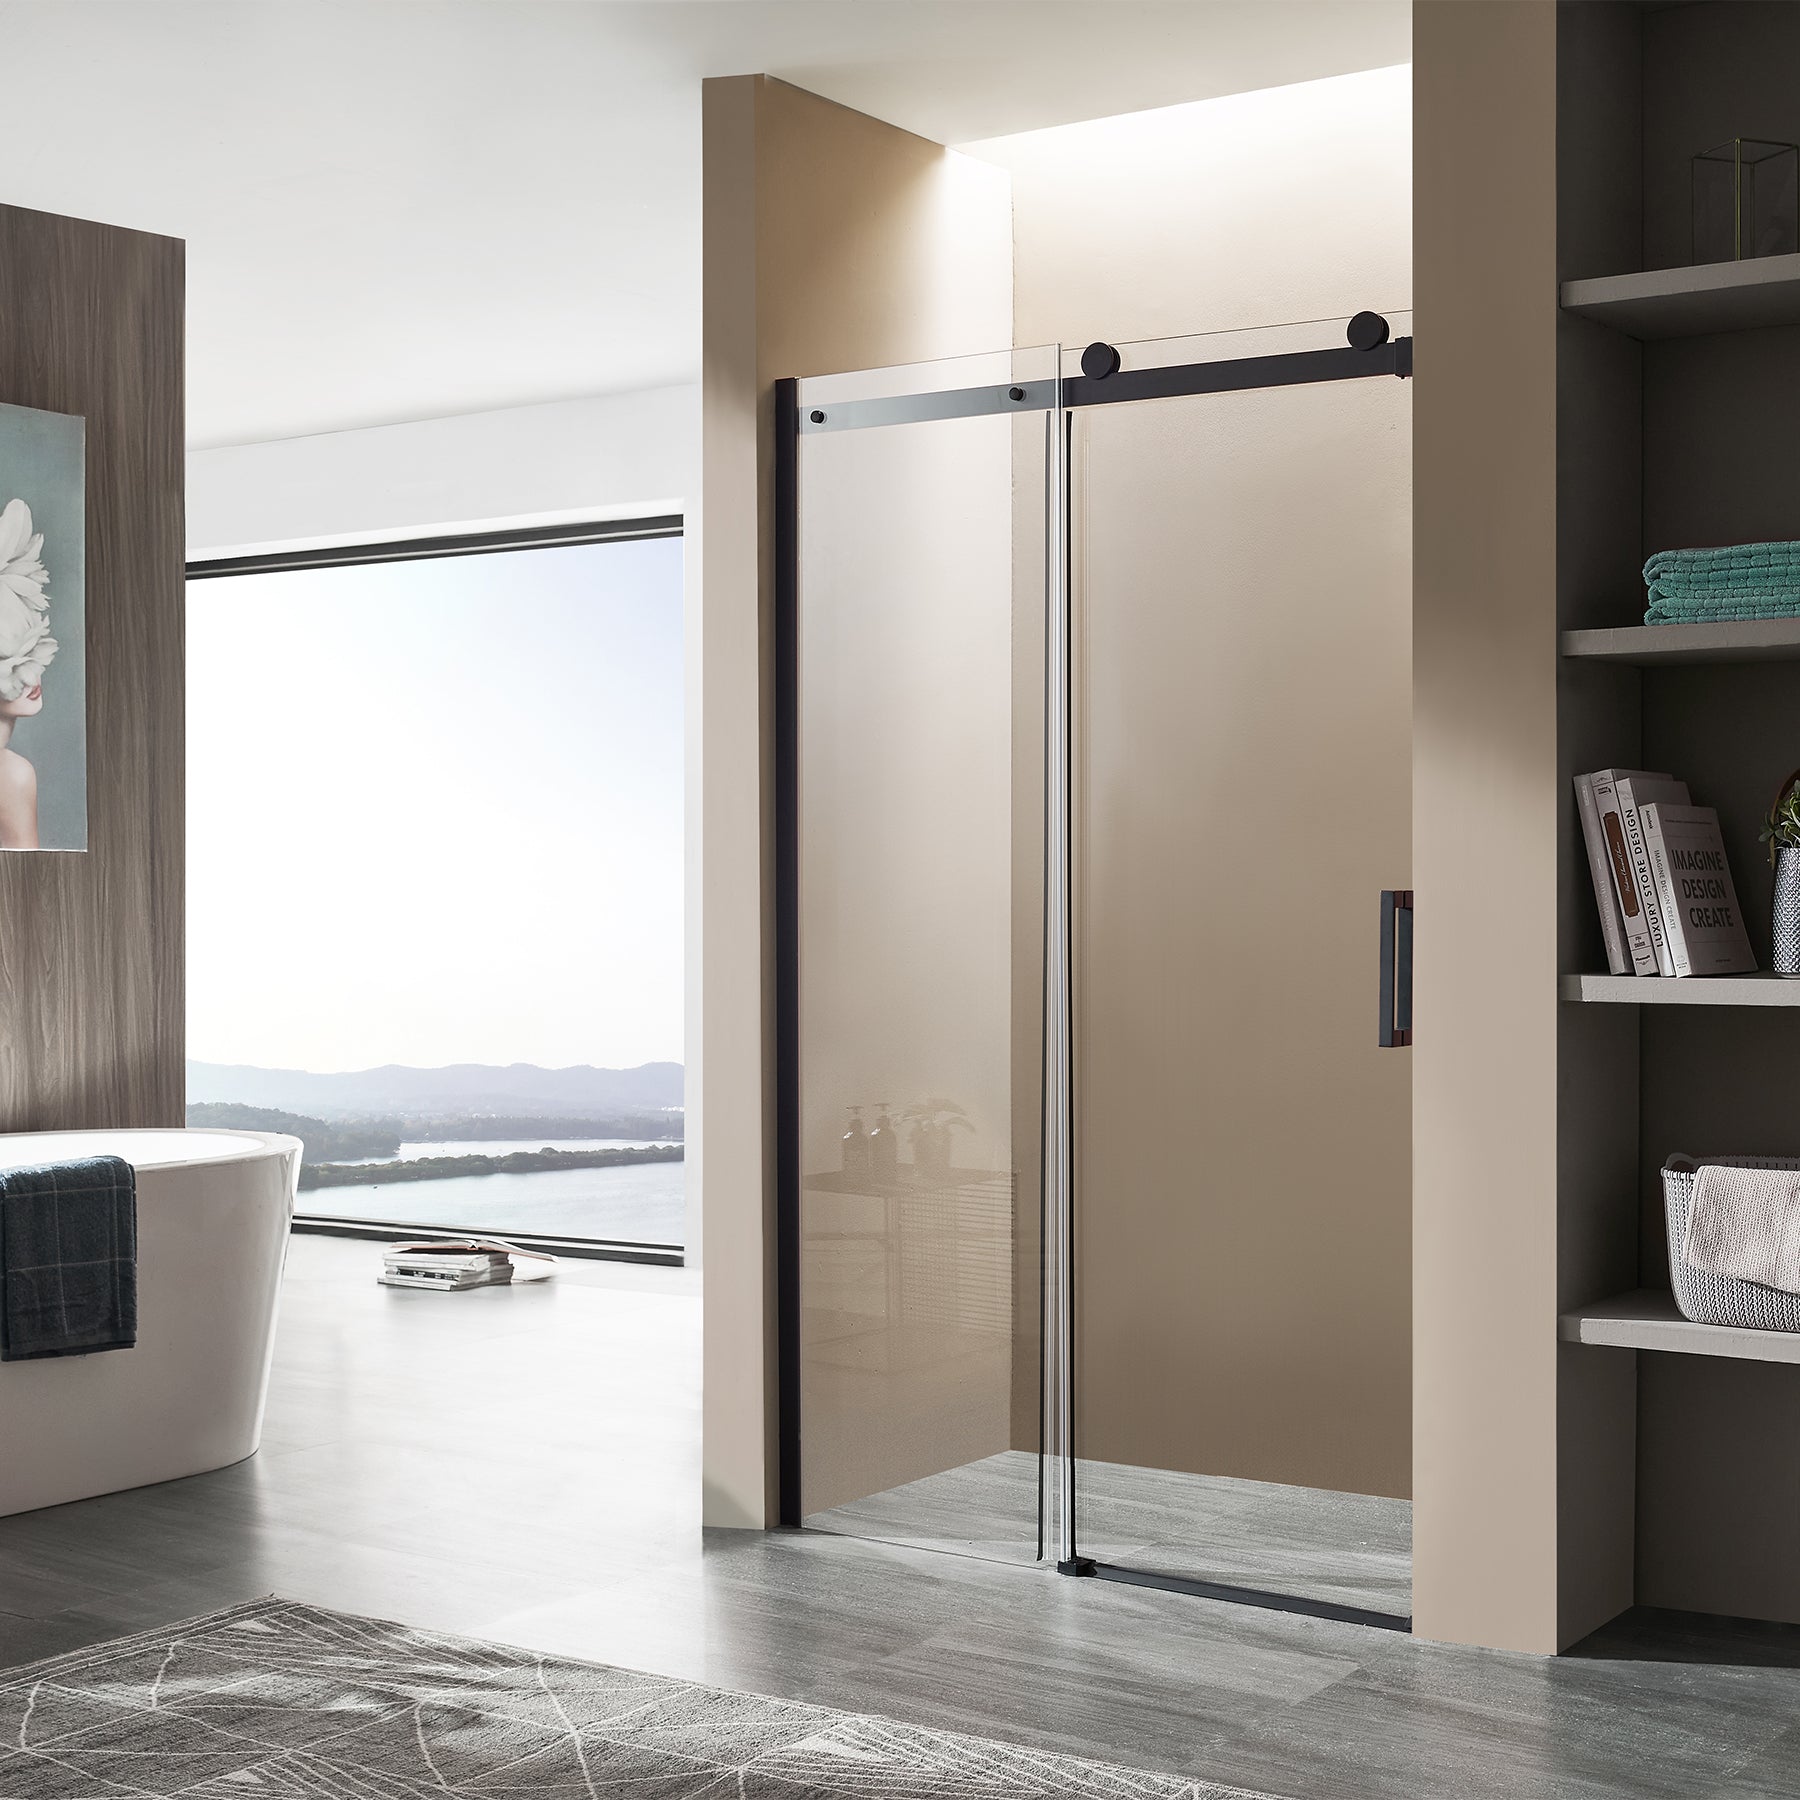 Rhodes Series 48 in. W x 76 in. H Frameless Sliding Shower Door with Handles & 8mm Clear Glass - Matte Black